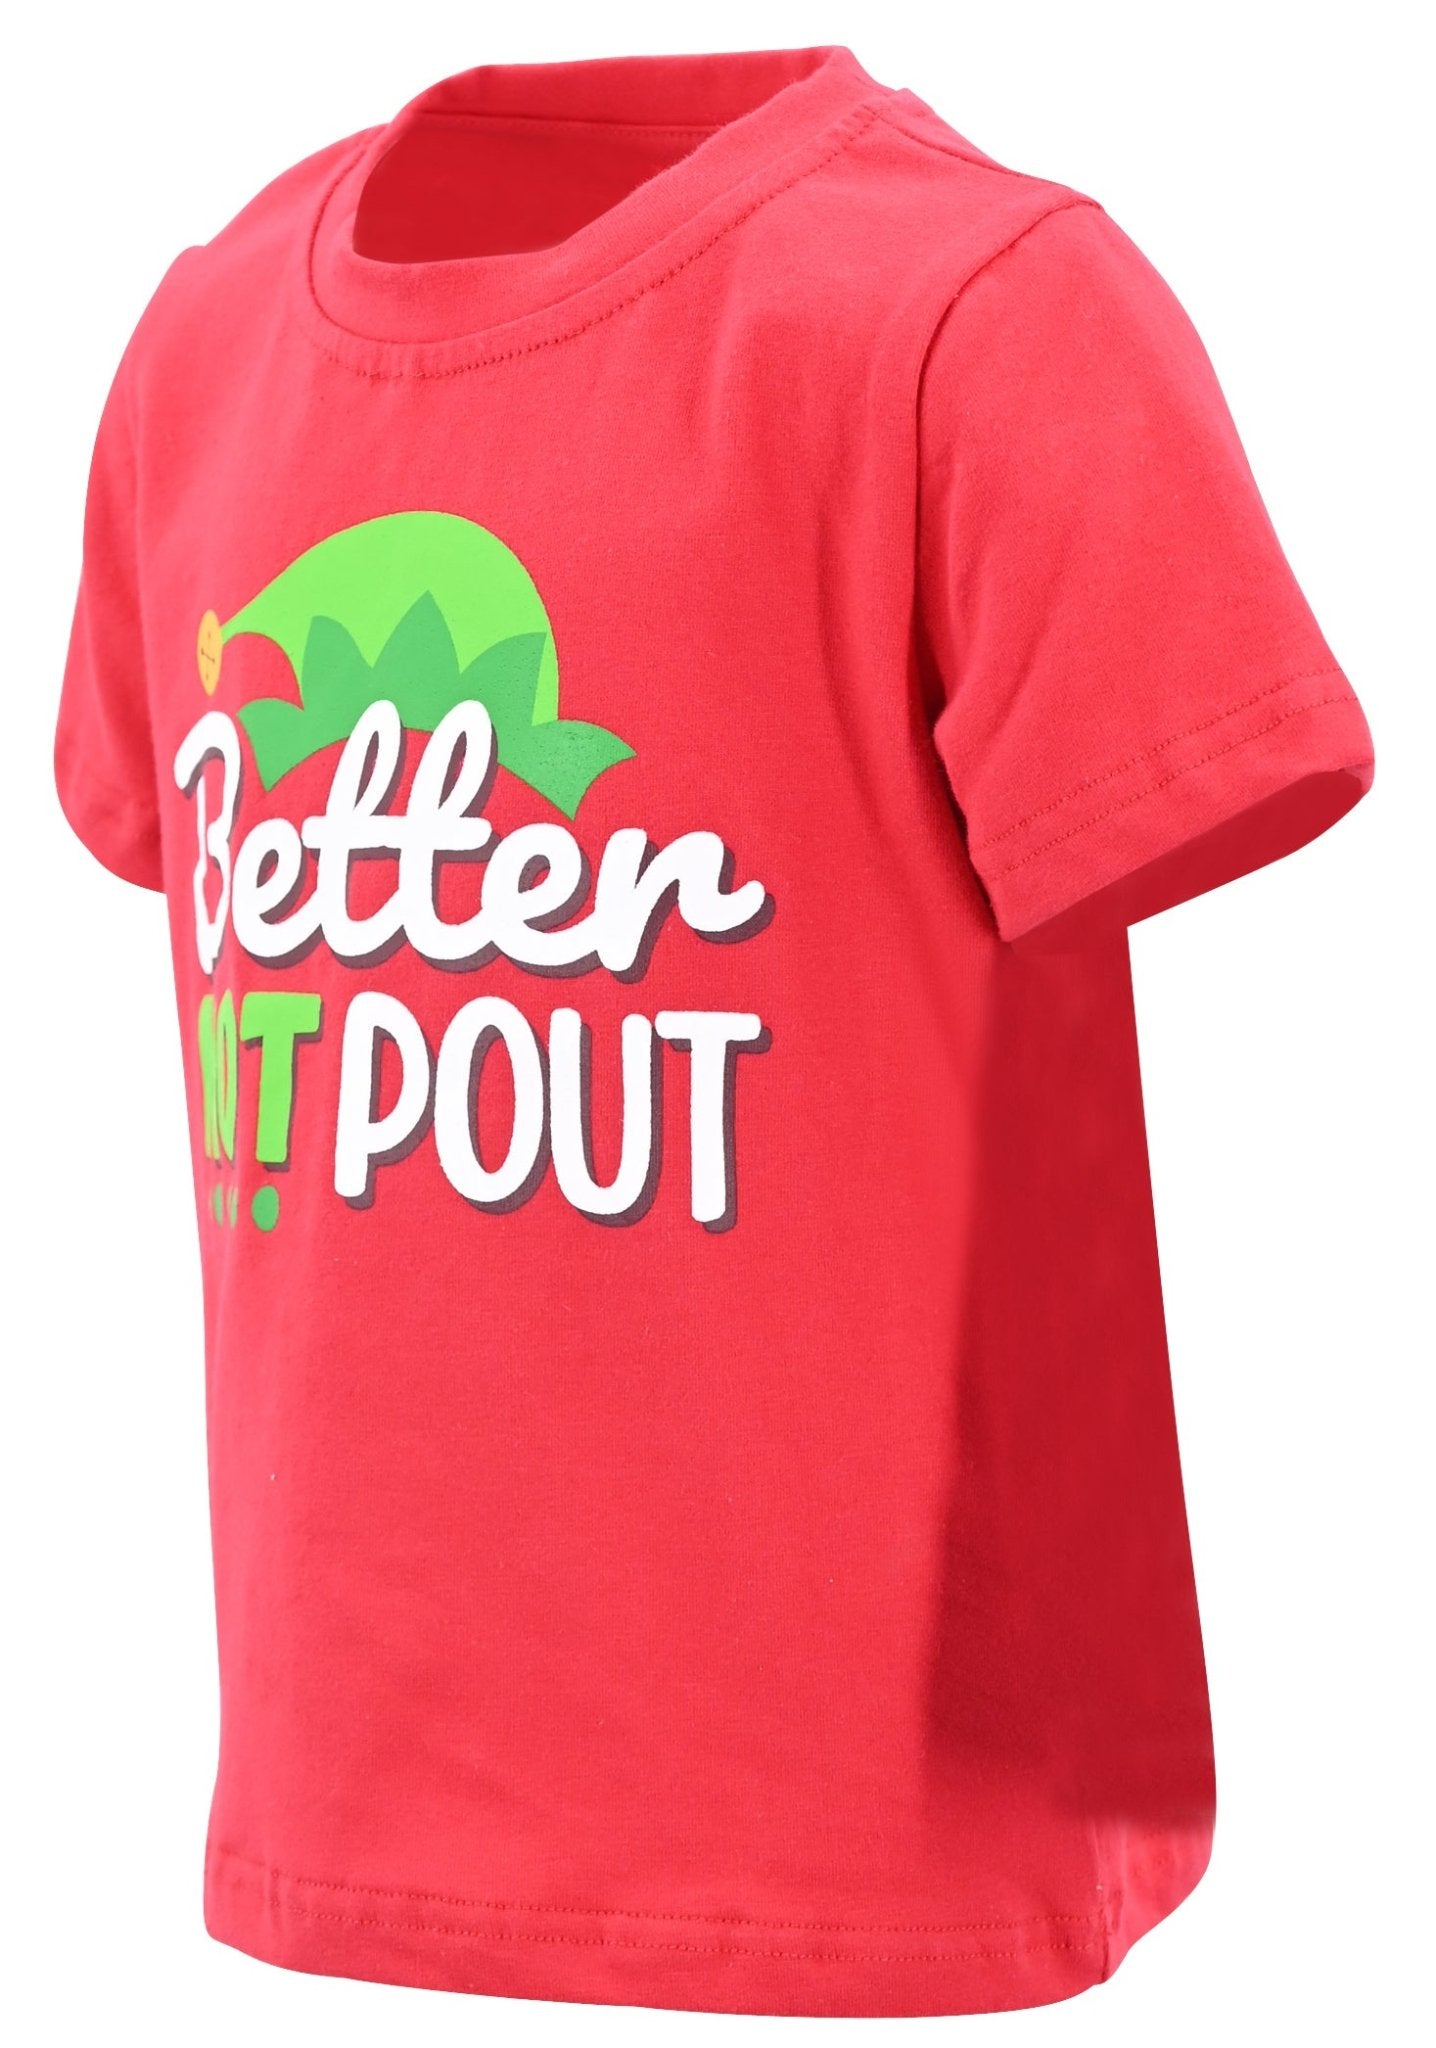 Boys' 'Better Not Pout' Christmas T-Shirt - Festive Red Holiday Tee for Toddlers - Sizes 18M to 12Y - Unique Baby Shop - Christmas